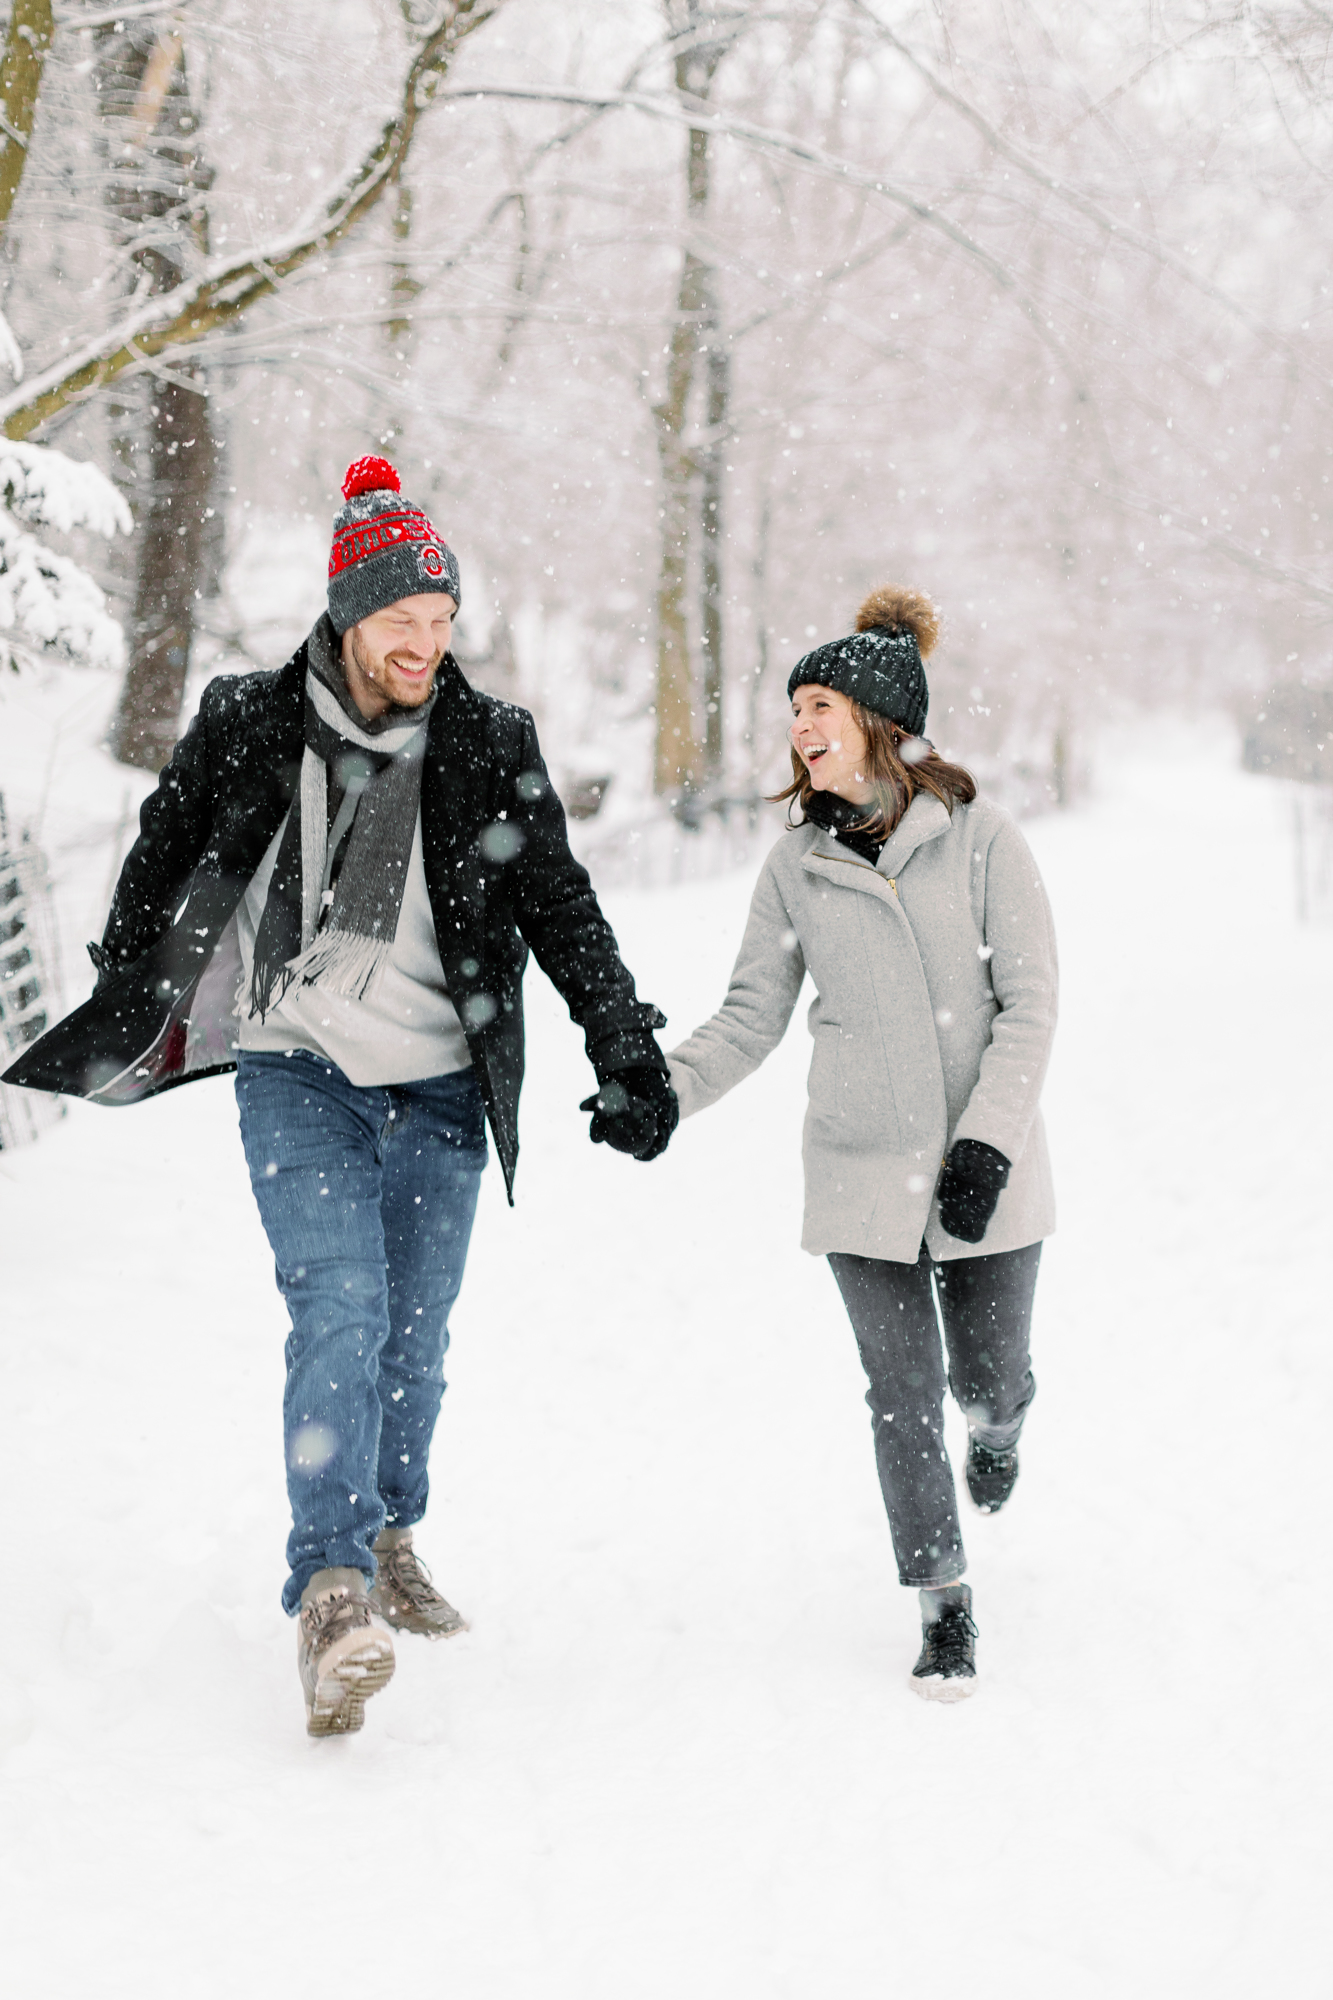 Beautiful and Snowy Engagement Photos in Prospect Park